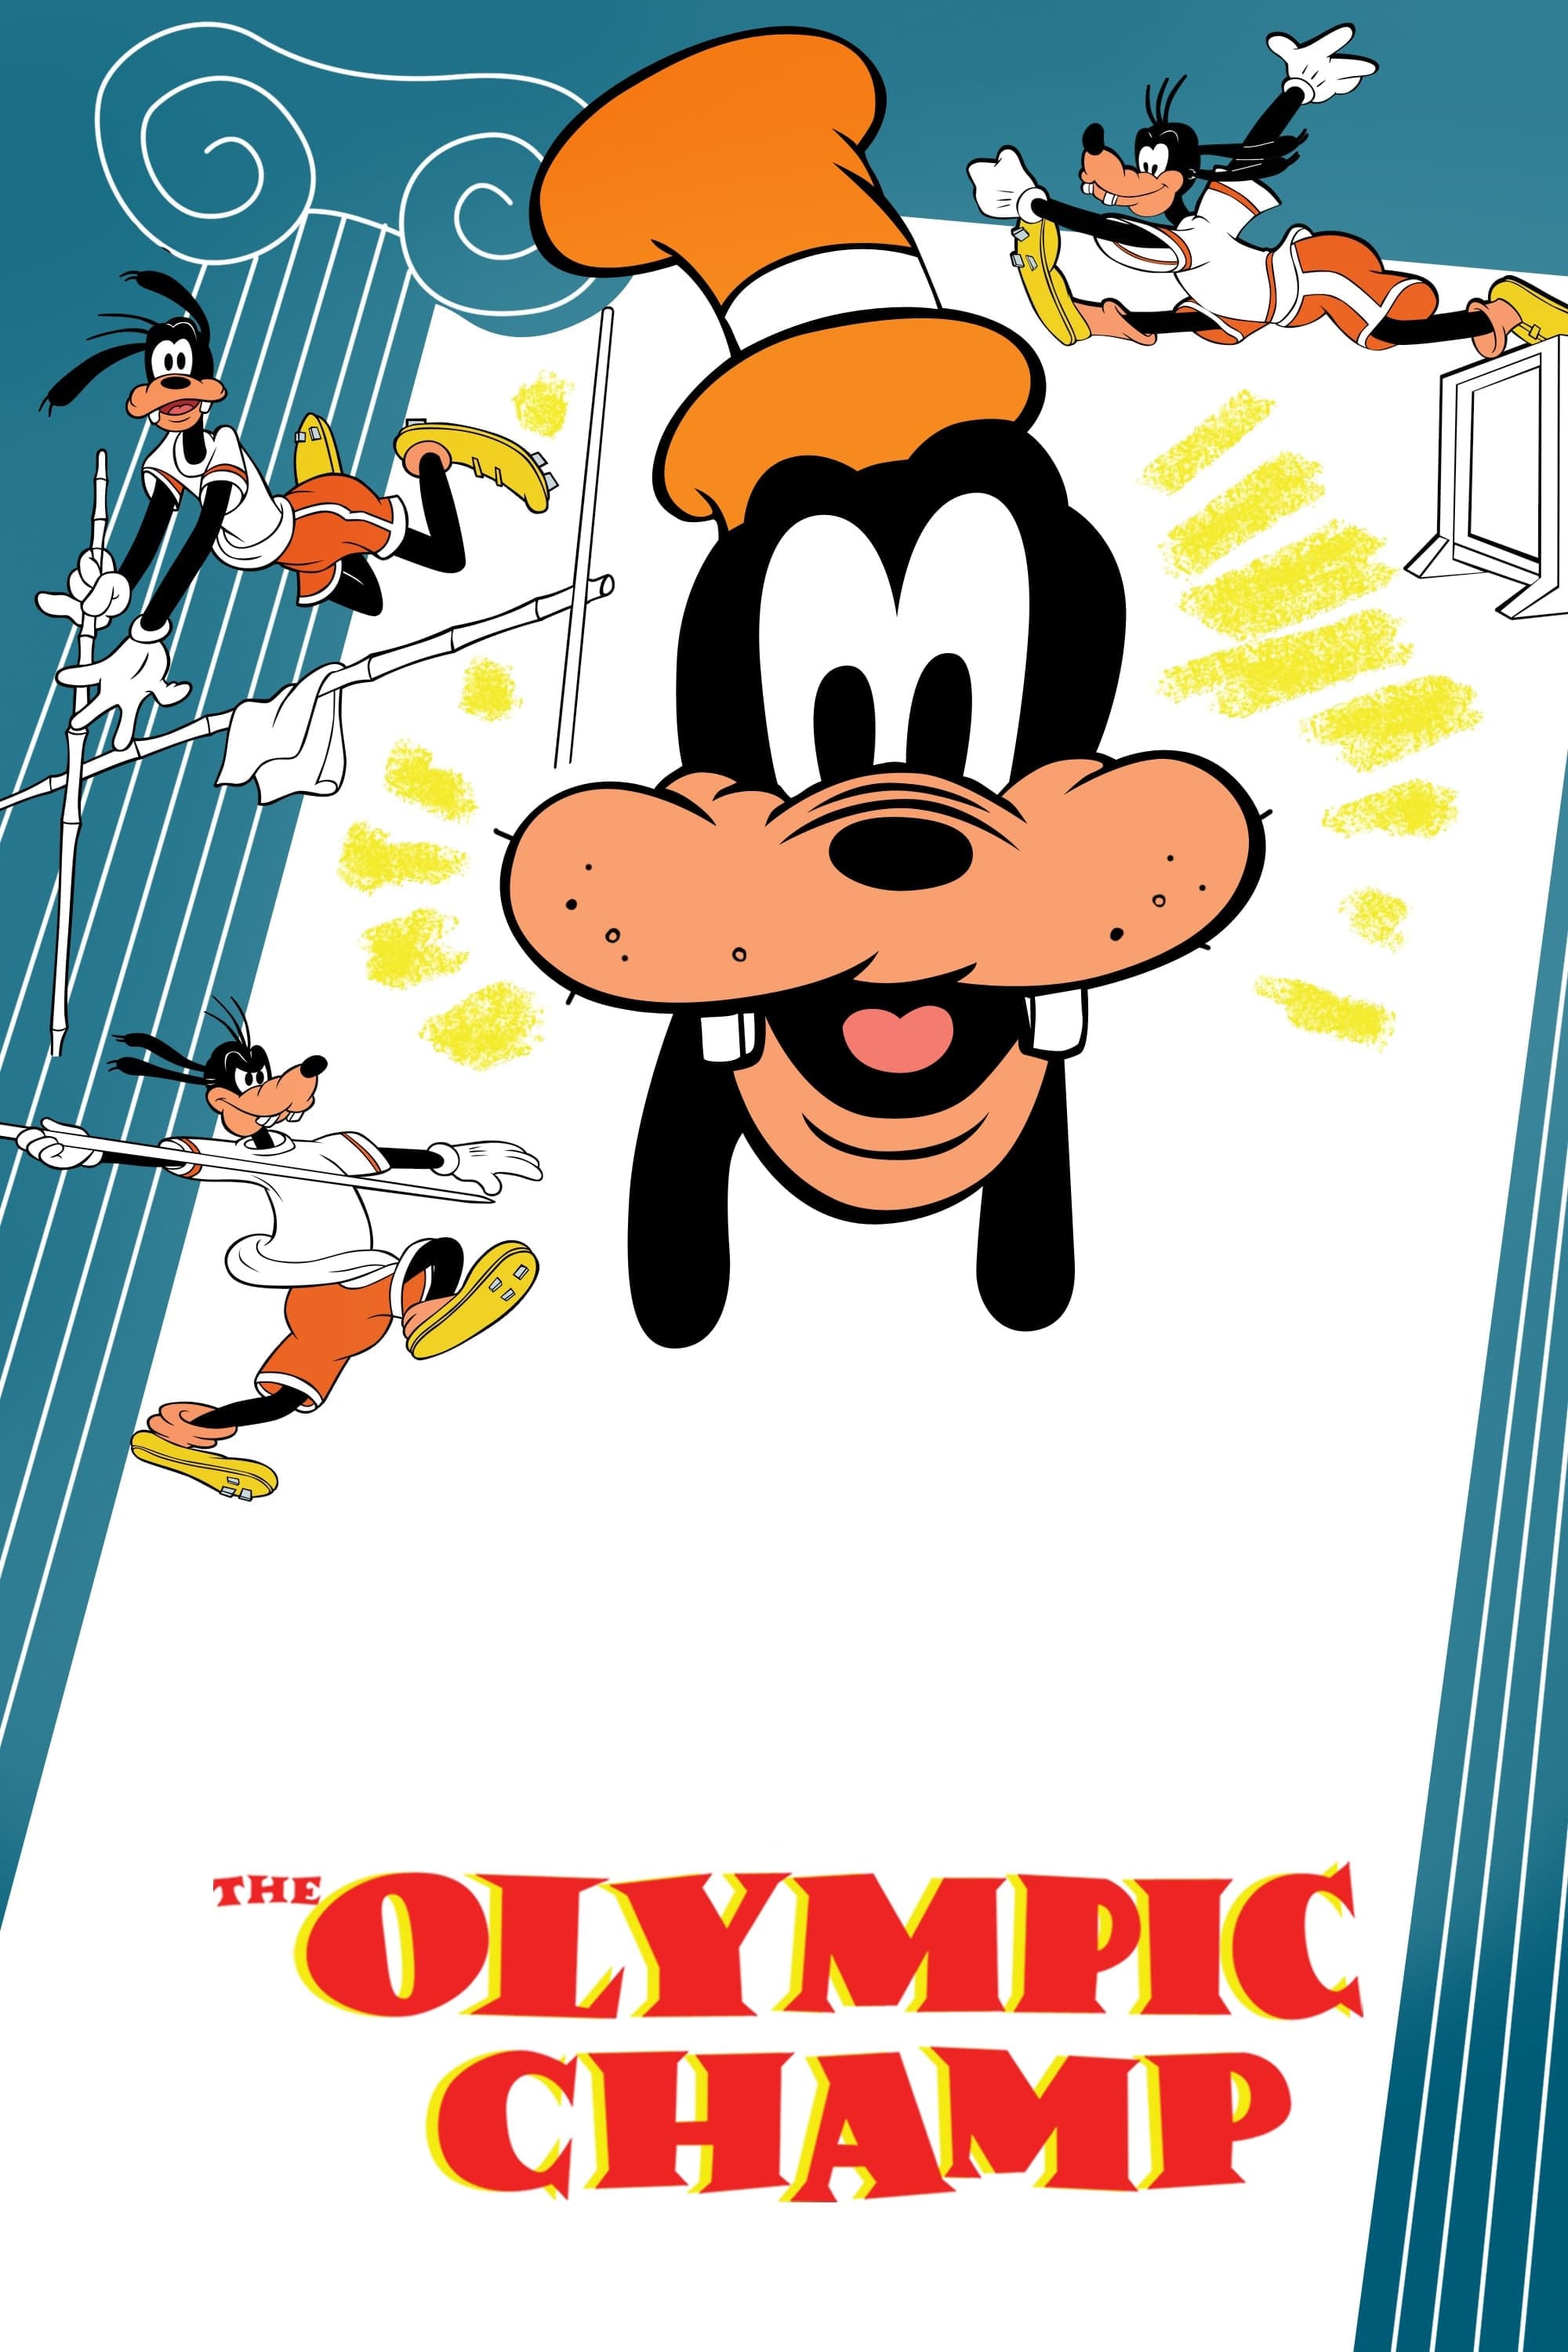 The Olympic Champ (1942)